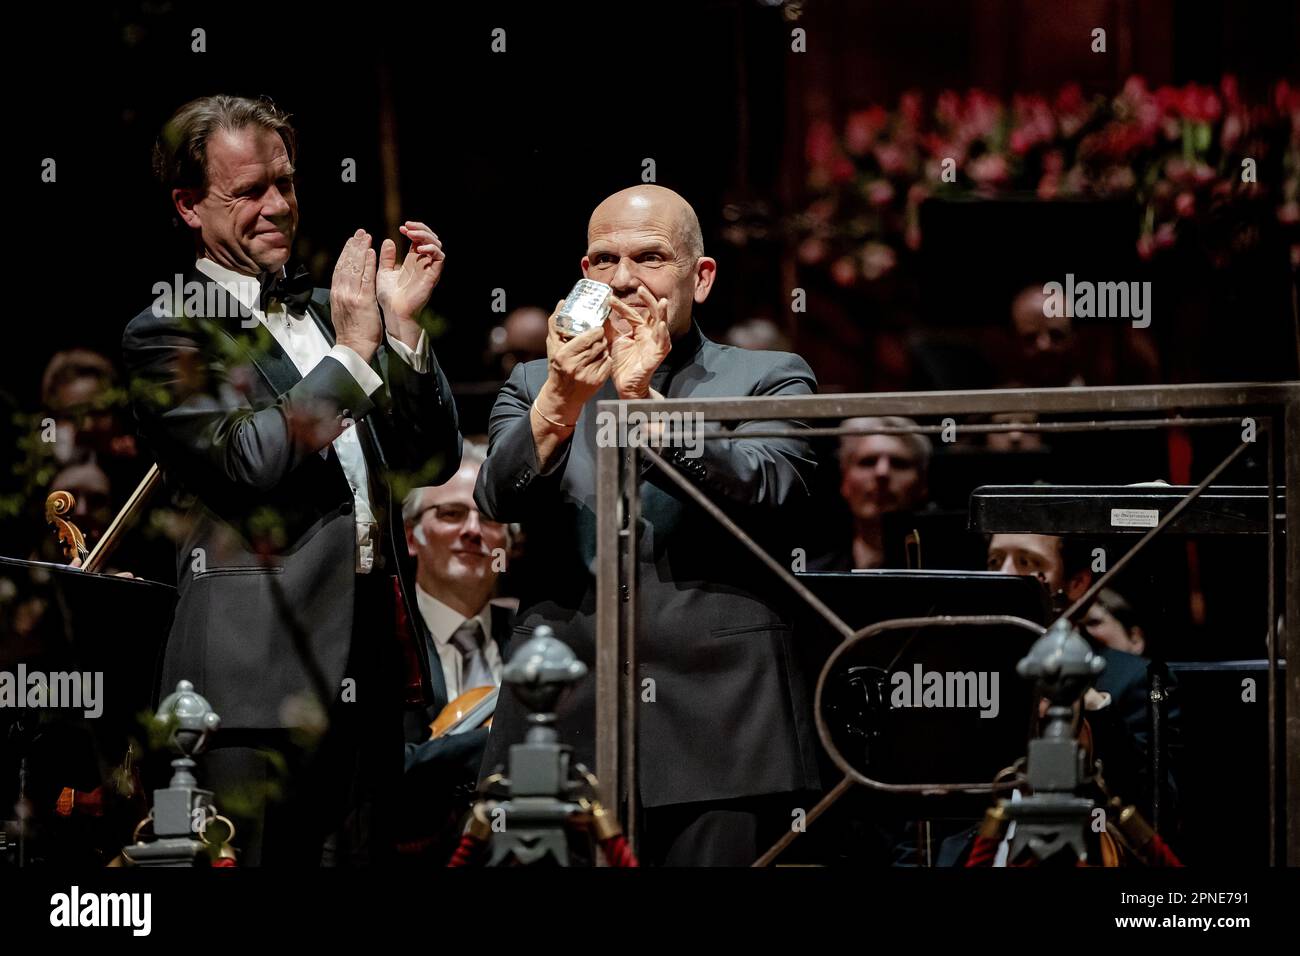 AMSTERDAM - Conductor Jaap van Zweden during the presentation of the Concertgebouw Award for his contribution to the artistic profile of the Concertgebouw. At the age of 19, the 62-year-old Van Zweden became the youngest ever concertmaster of the Concertgebouworkest. ANP ROBIN VAN LONKHUIJSEN netherlands out - belgium out Stock Photo